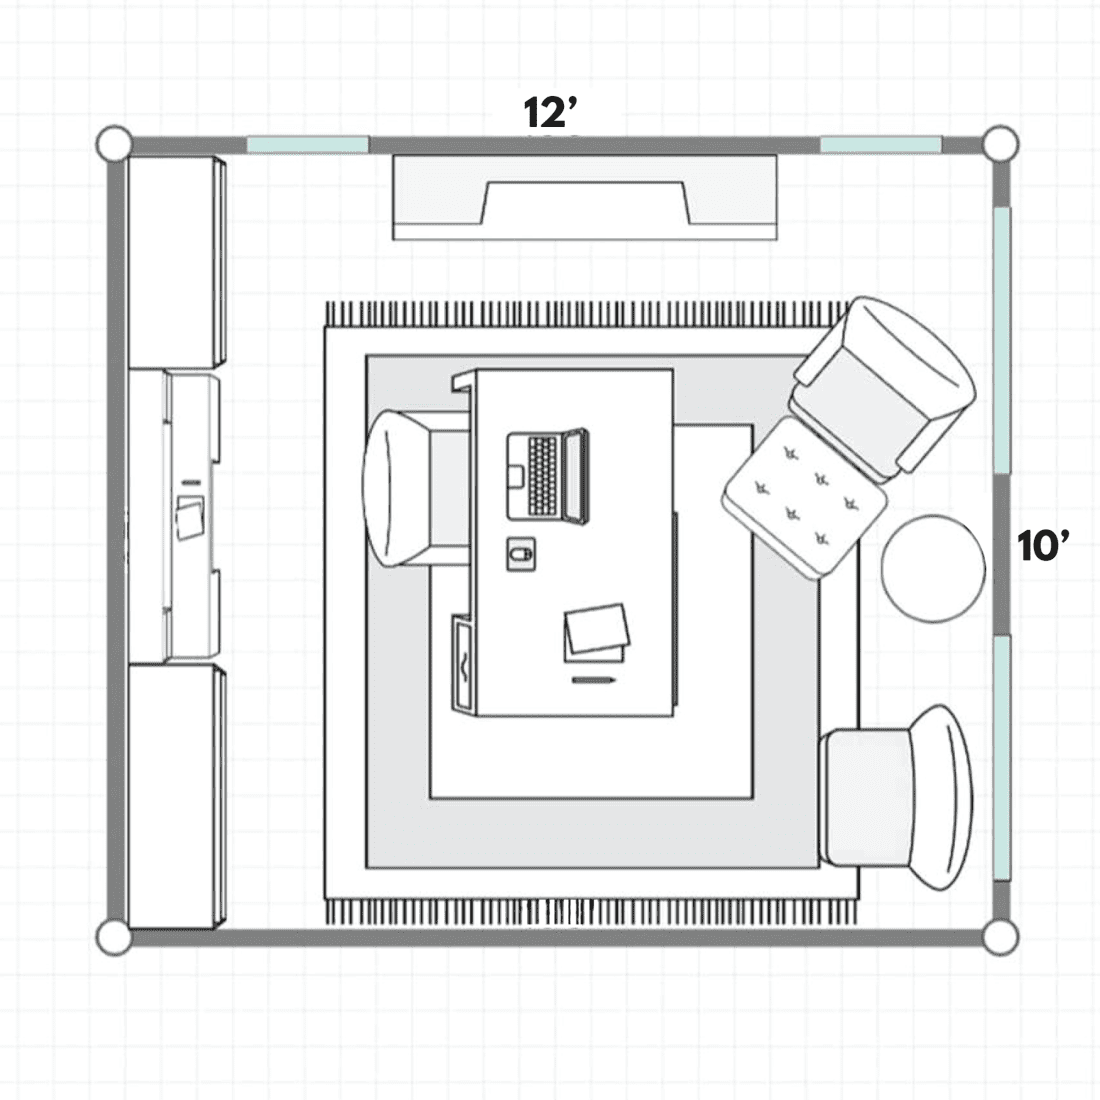 2D layout of a luxury home office interior with fireplace, wooden furniture and leather chairs